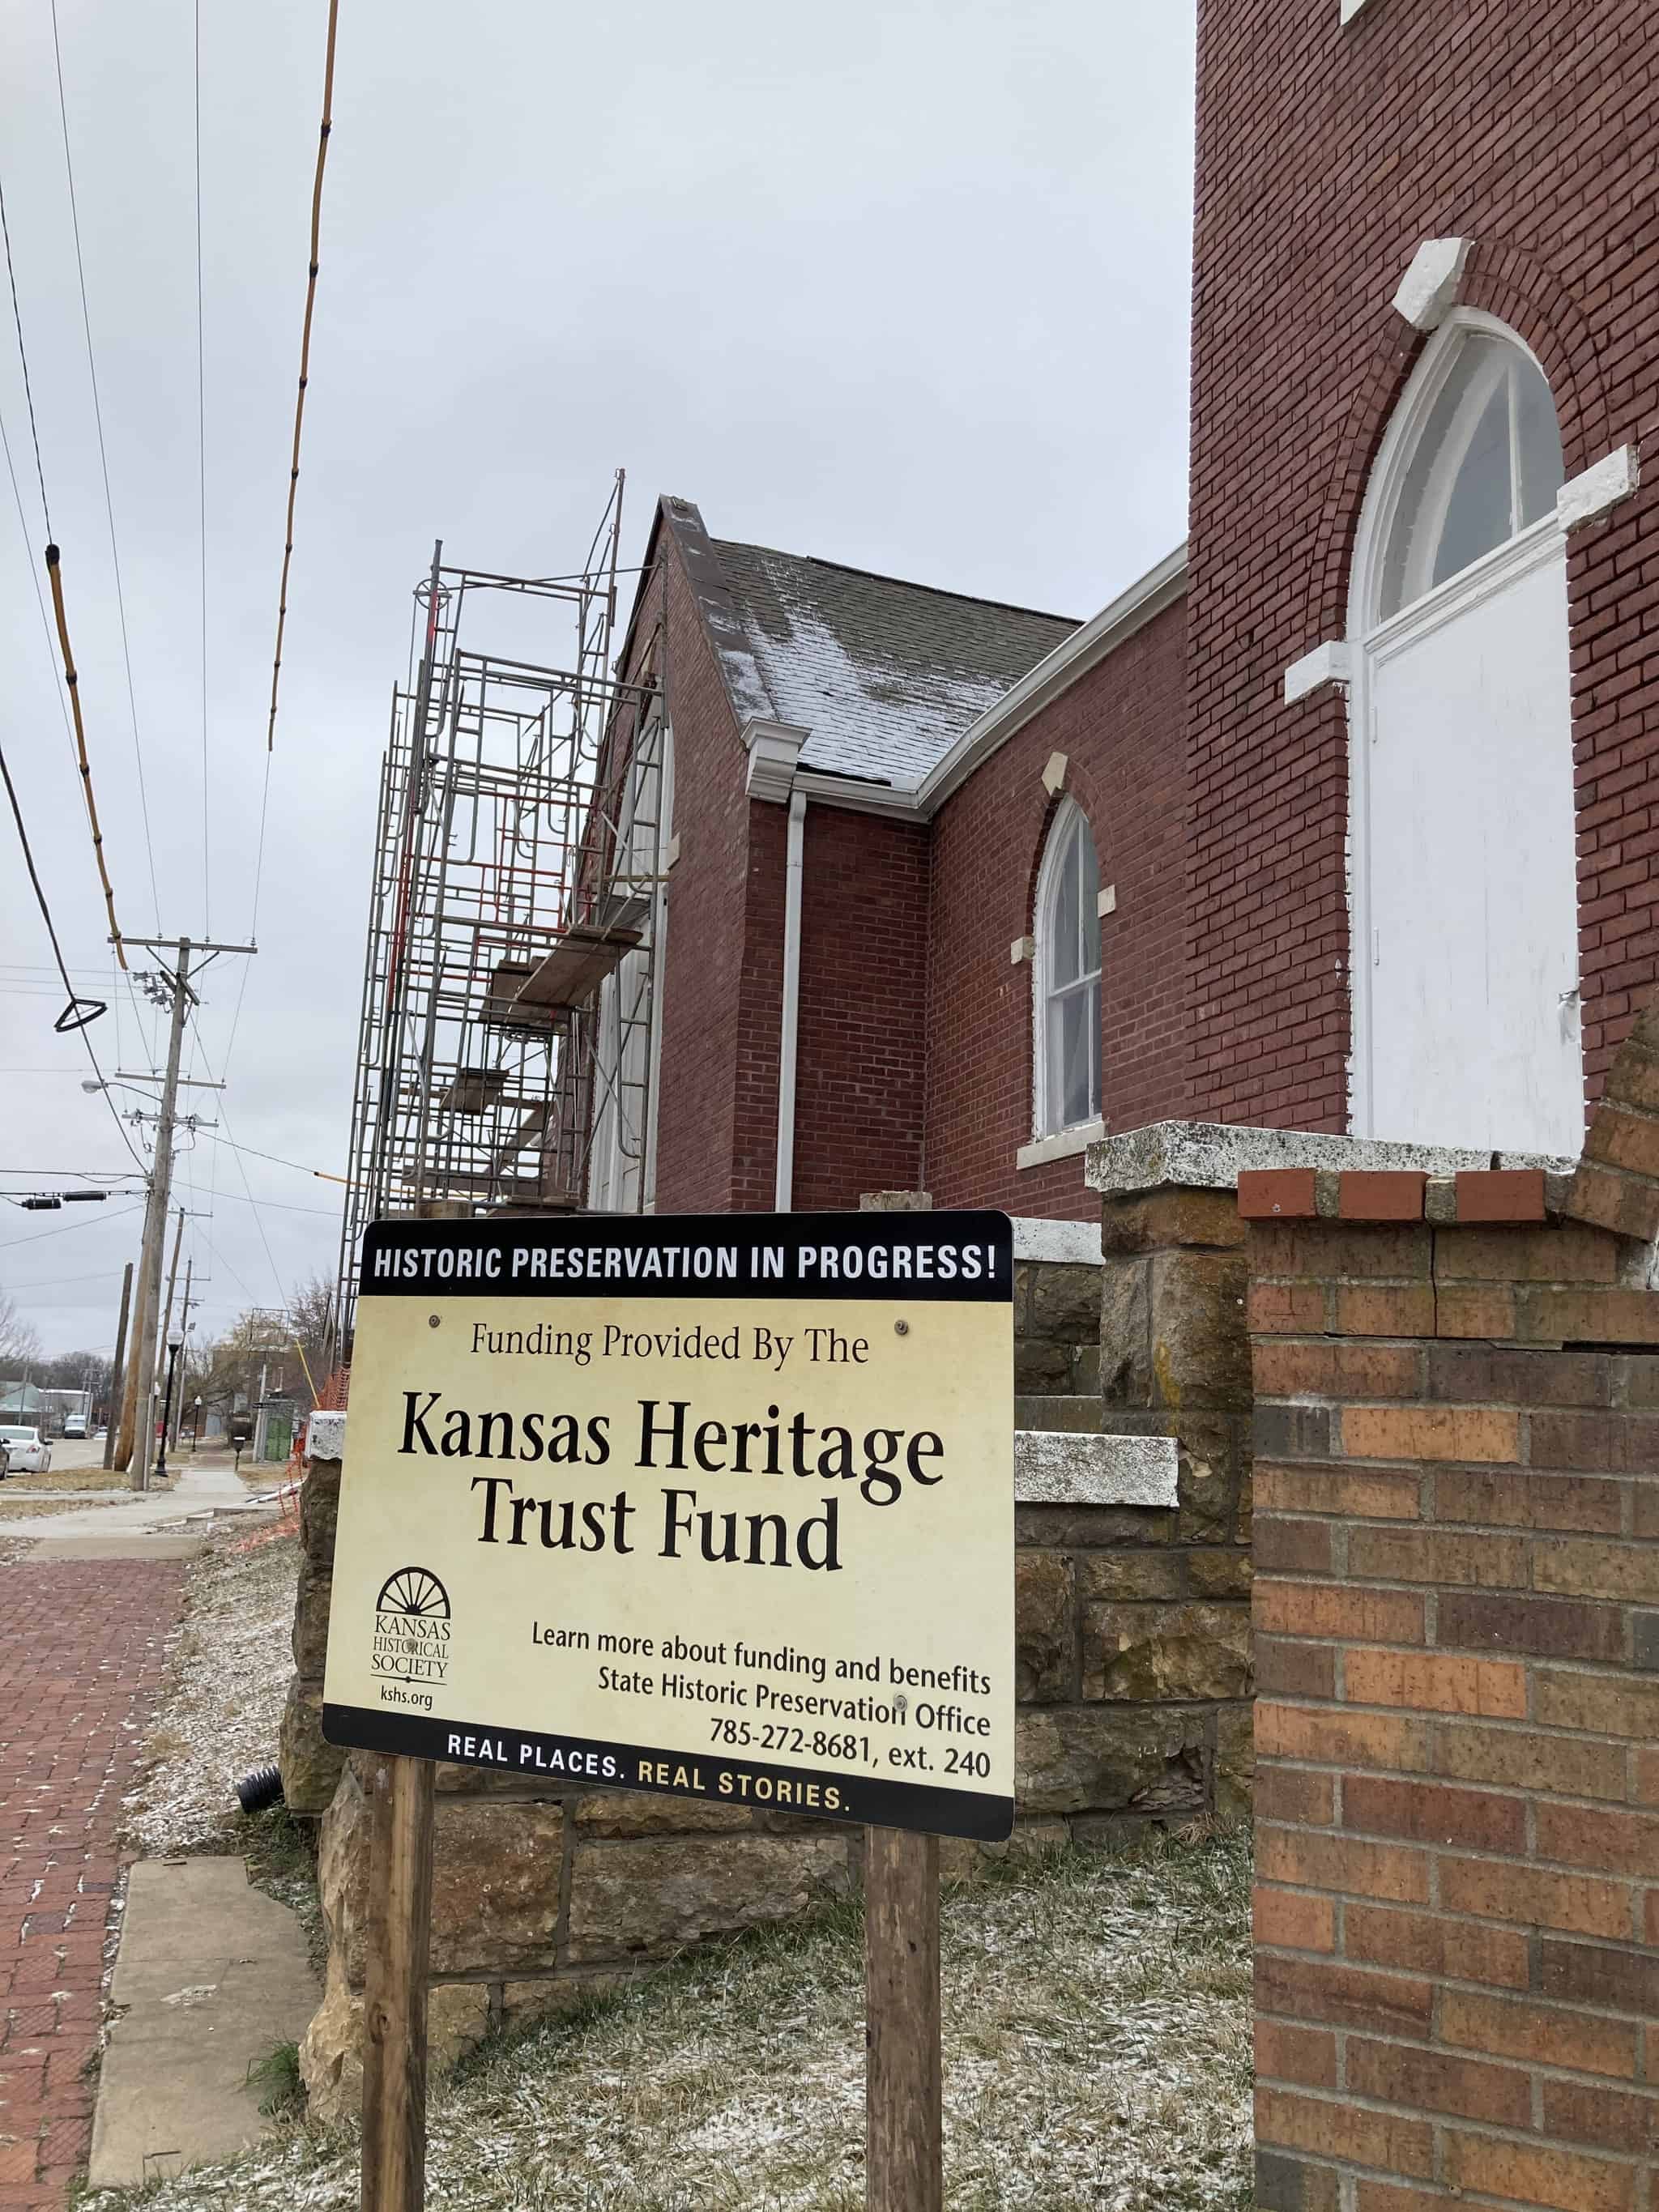 Heritage Trust Fund grants from the Kansas Historical Society made restoration work on the historic church possible.